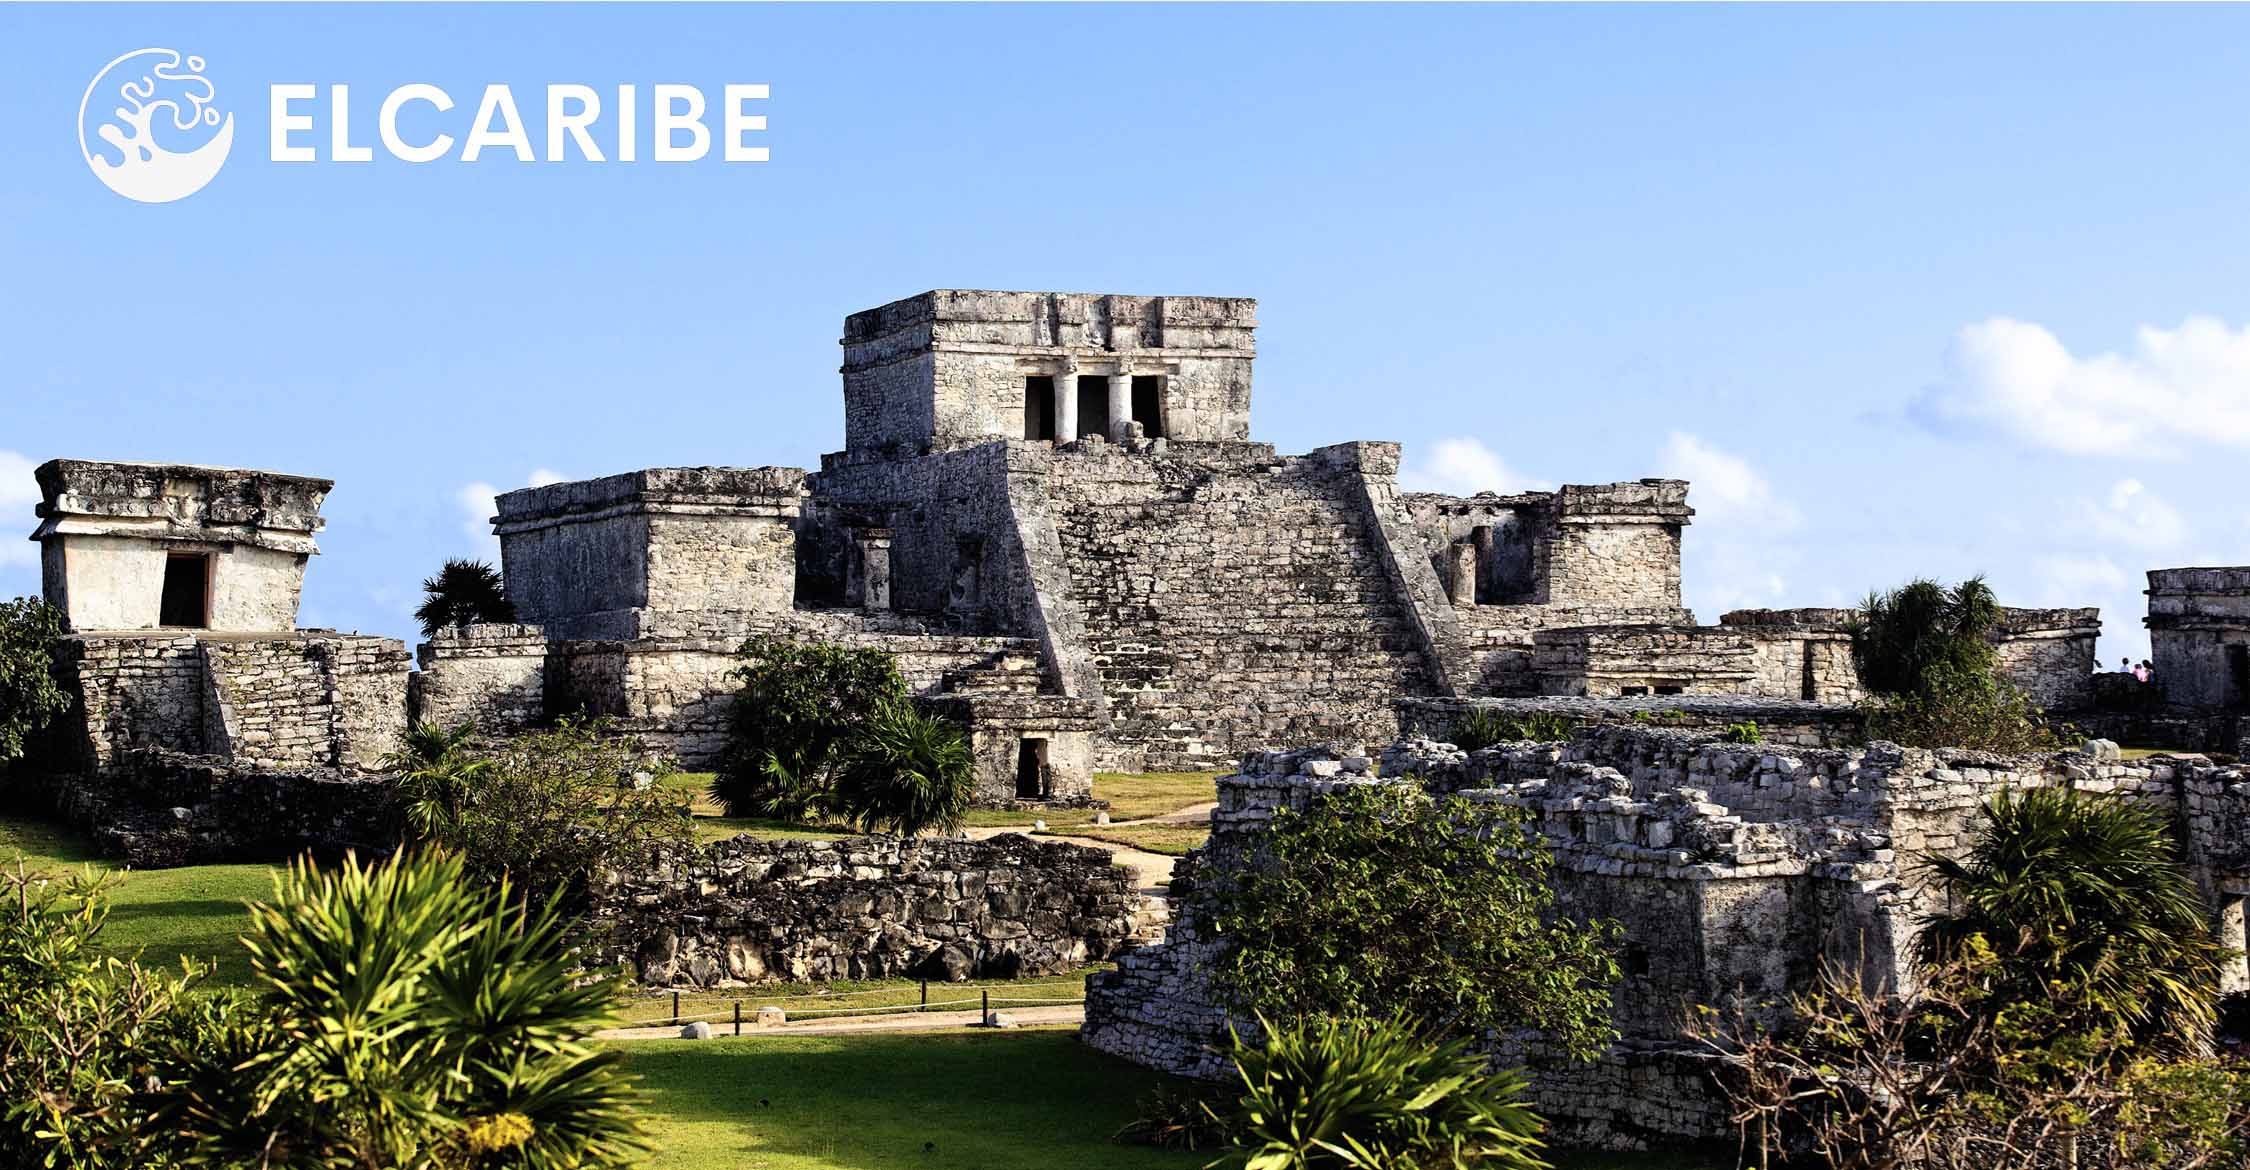 he famous archaeological ruins of Tulum